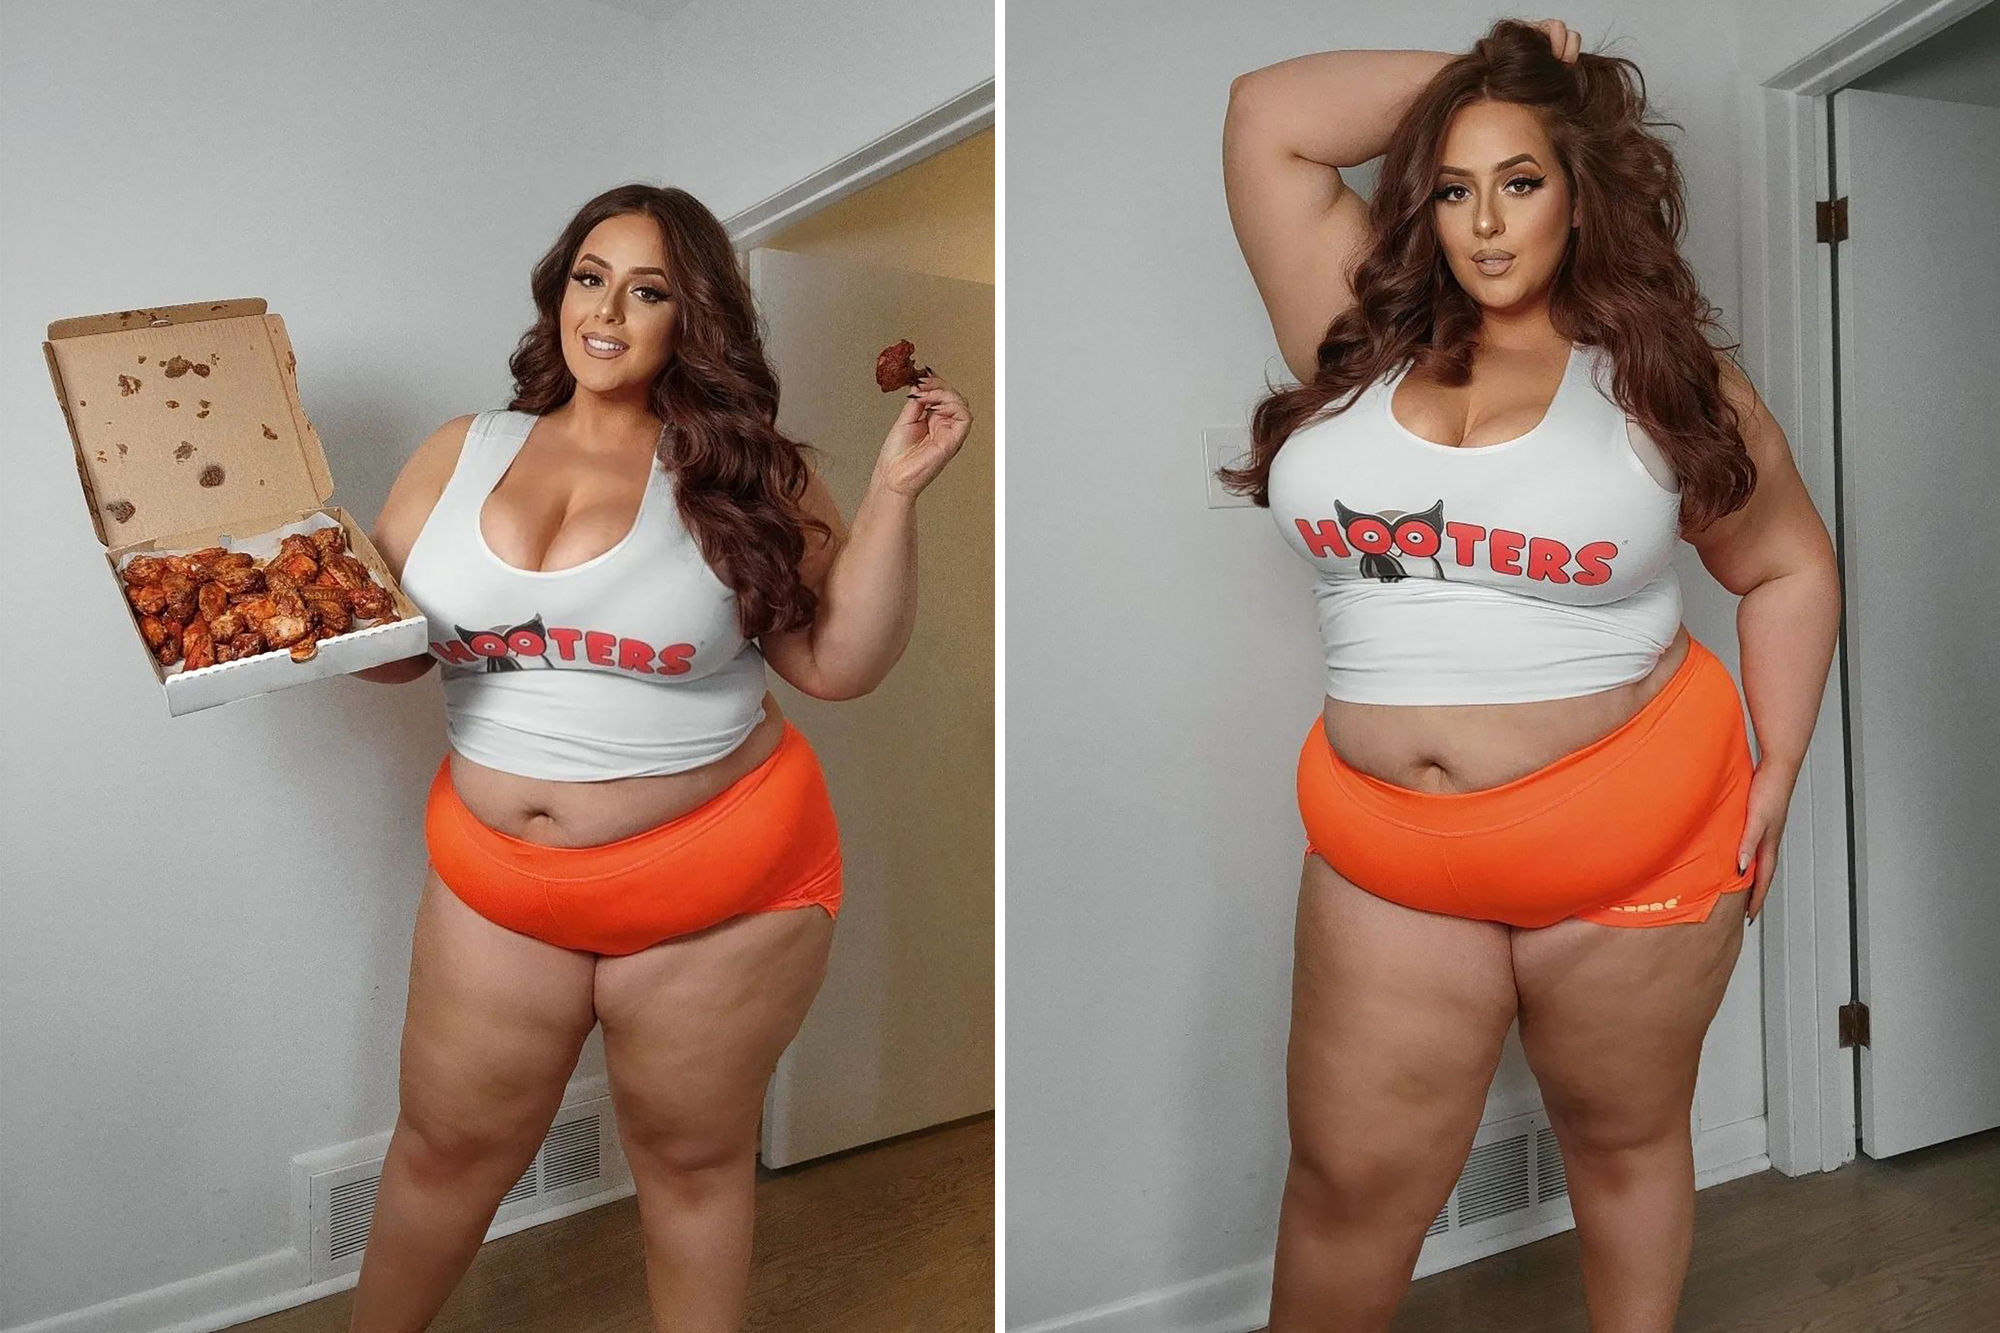 alicia kho recommends hot girls at hooters pic